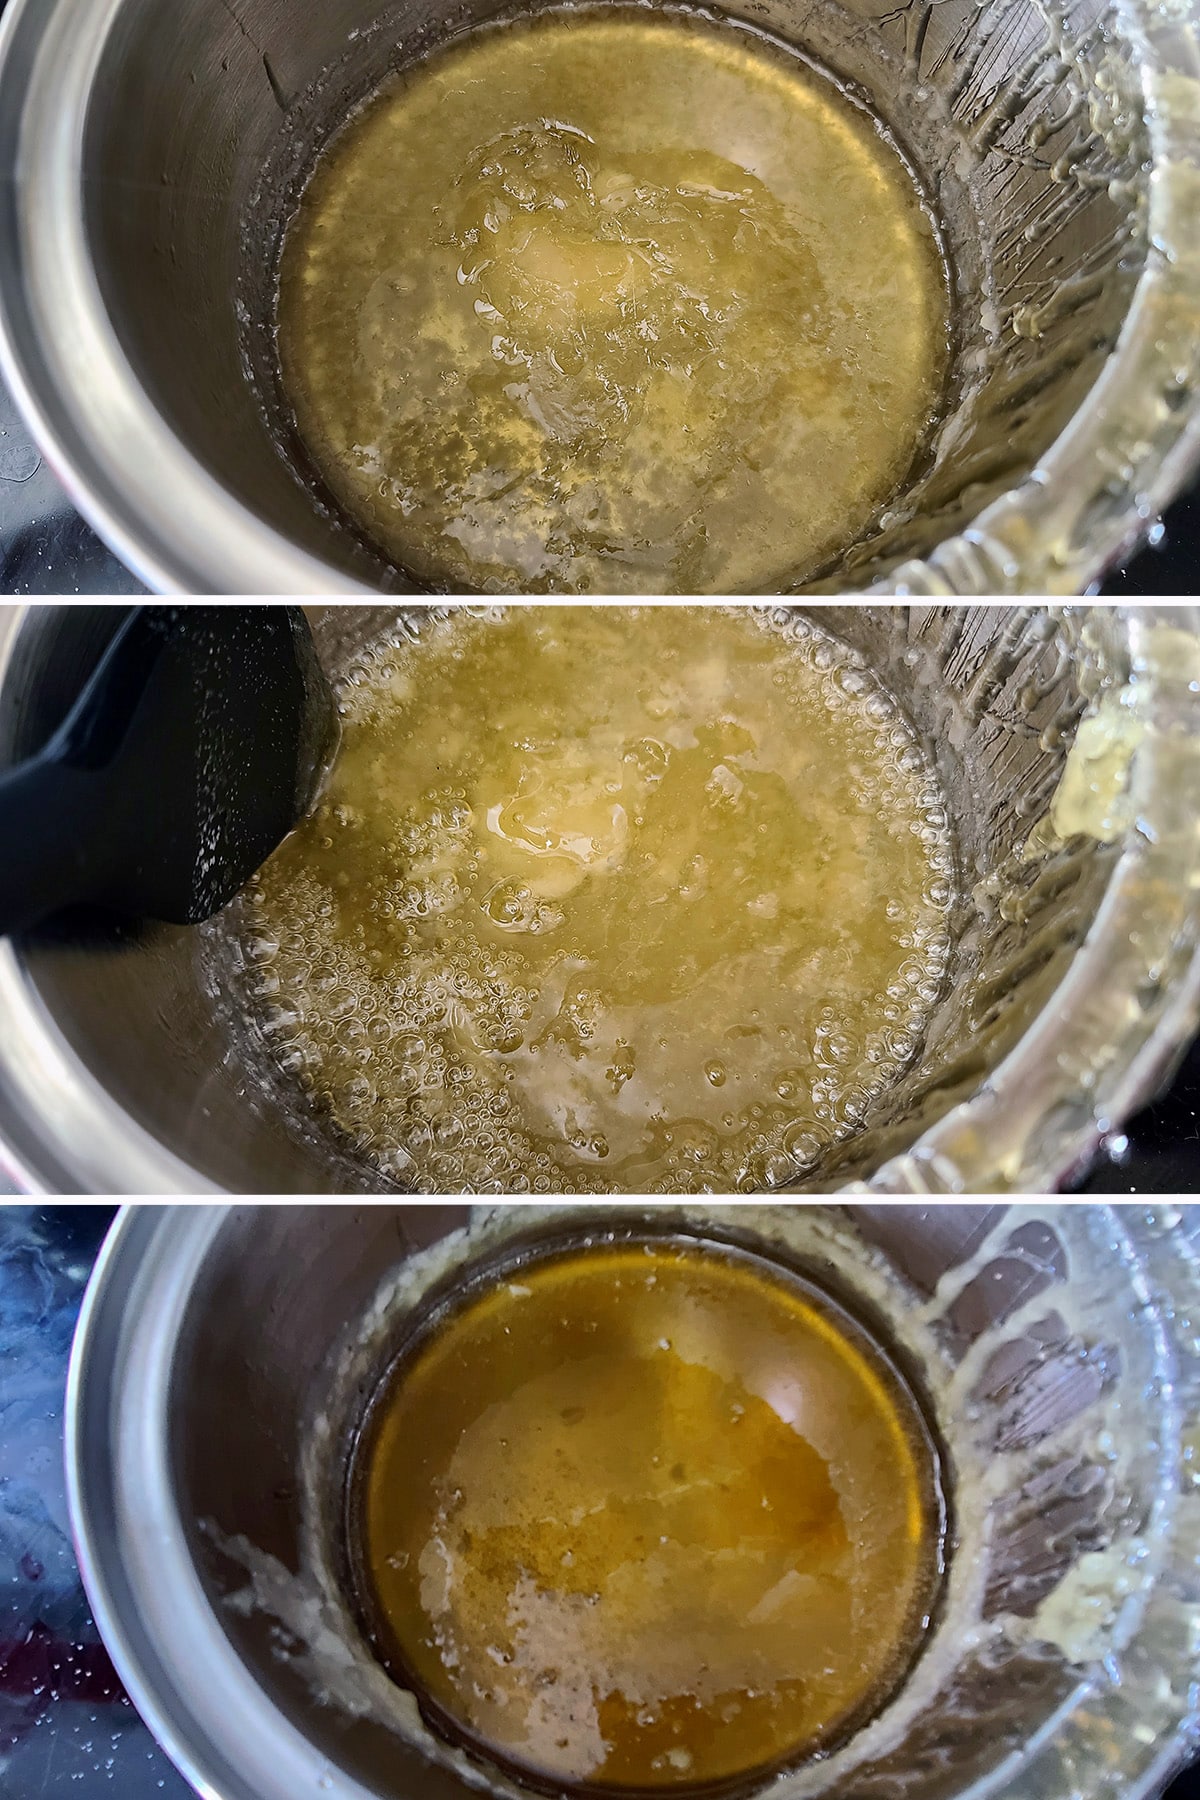 A 3 part image showing stages of a pot of sugar that’s seizing, going from smooth to lumpy.